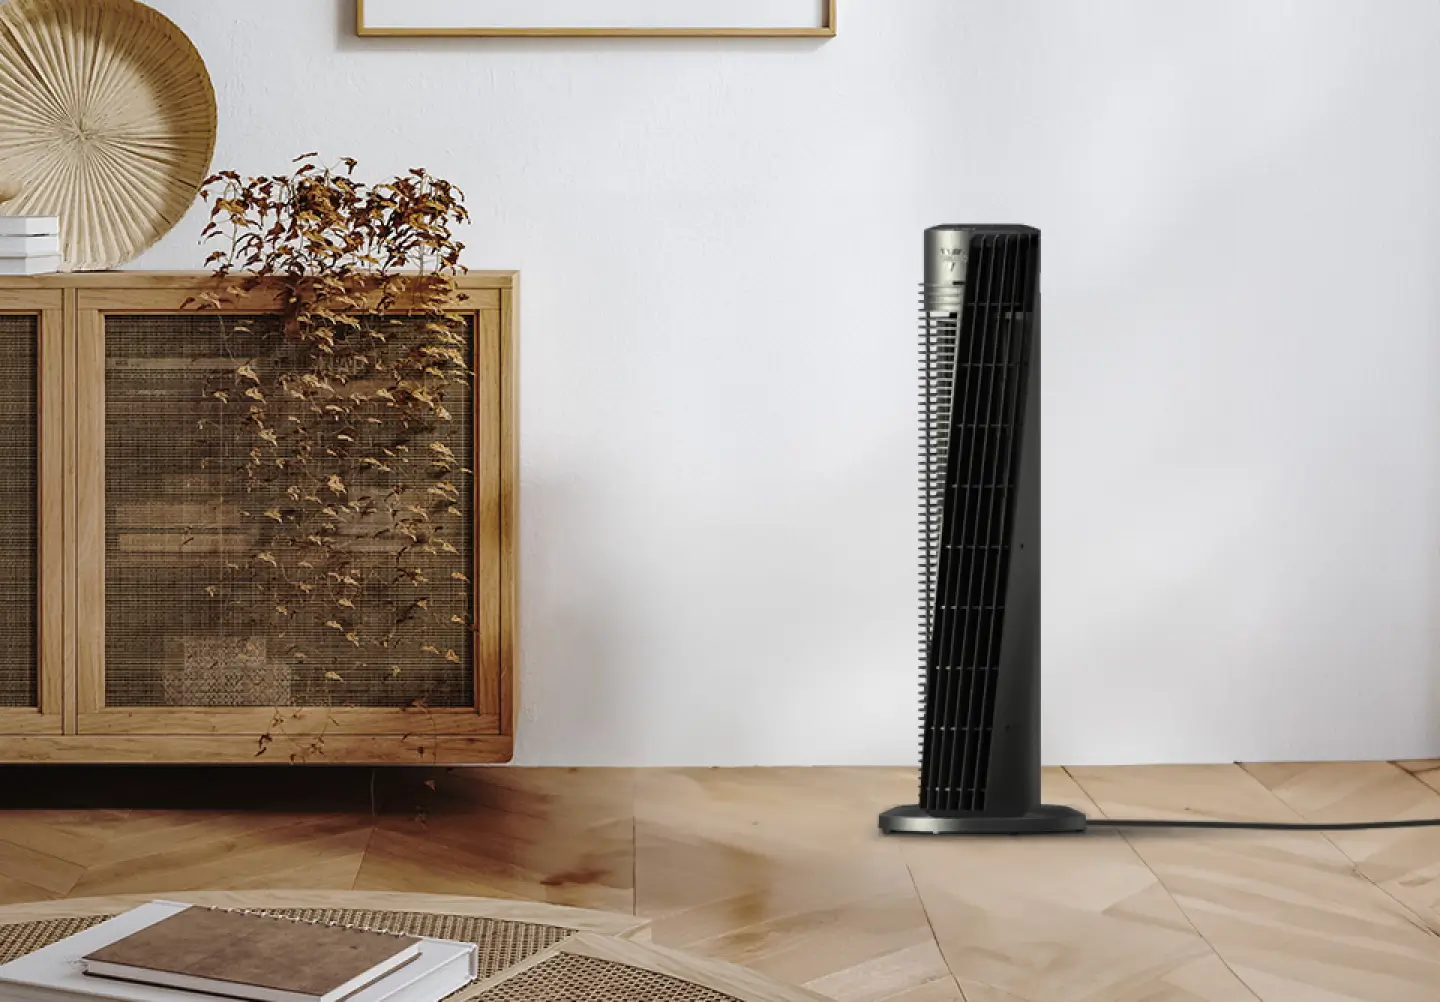 Lifestyle image of OSC54 tower fan. The fan is in a room with a grey wall, wood floor and a wicker cabinet and coffee table. The tower fan's cord goes off to the right, indicating it is plugged in